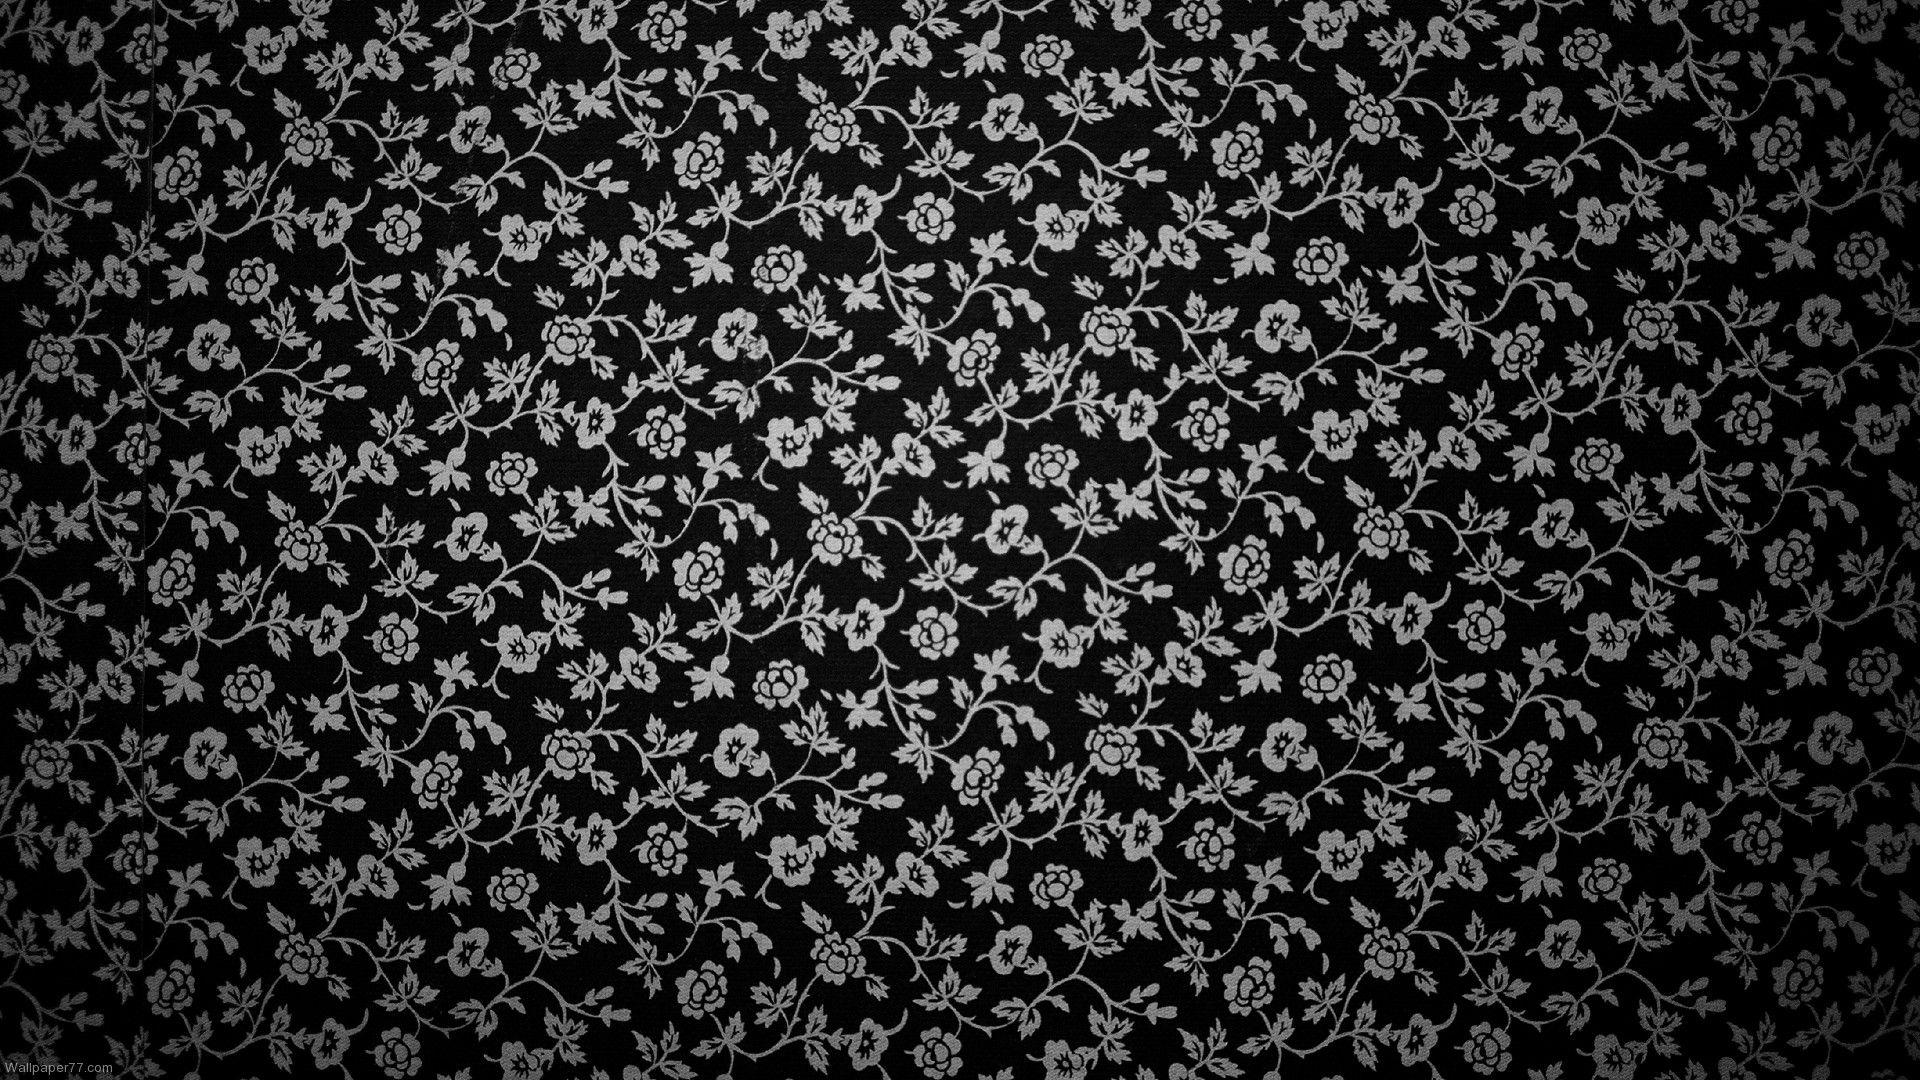 Black And White Patterned Wallpaper 12483 HD Wallpaper. Background